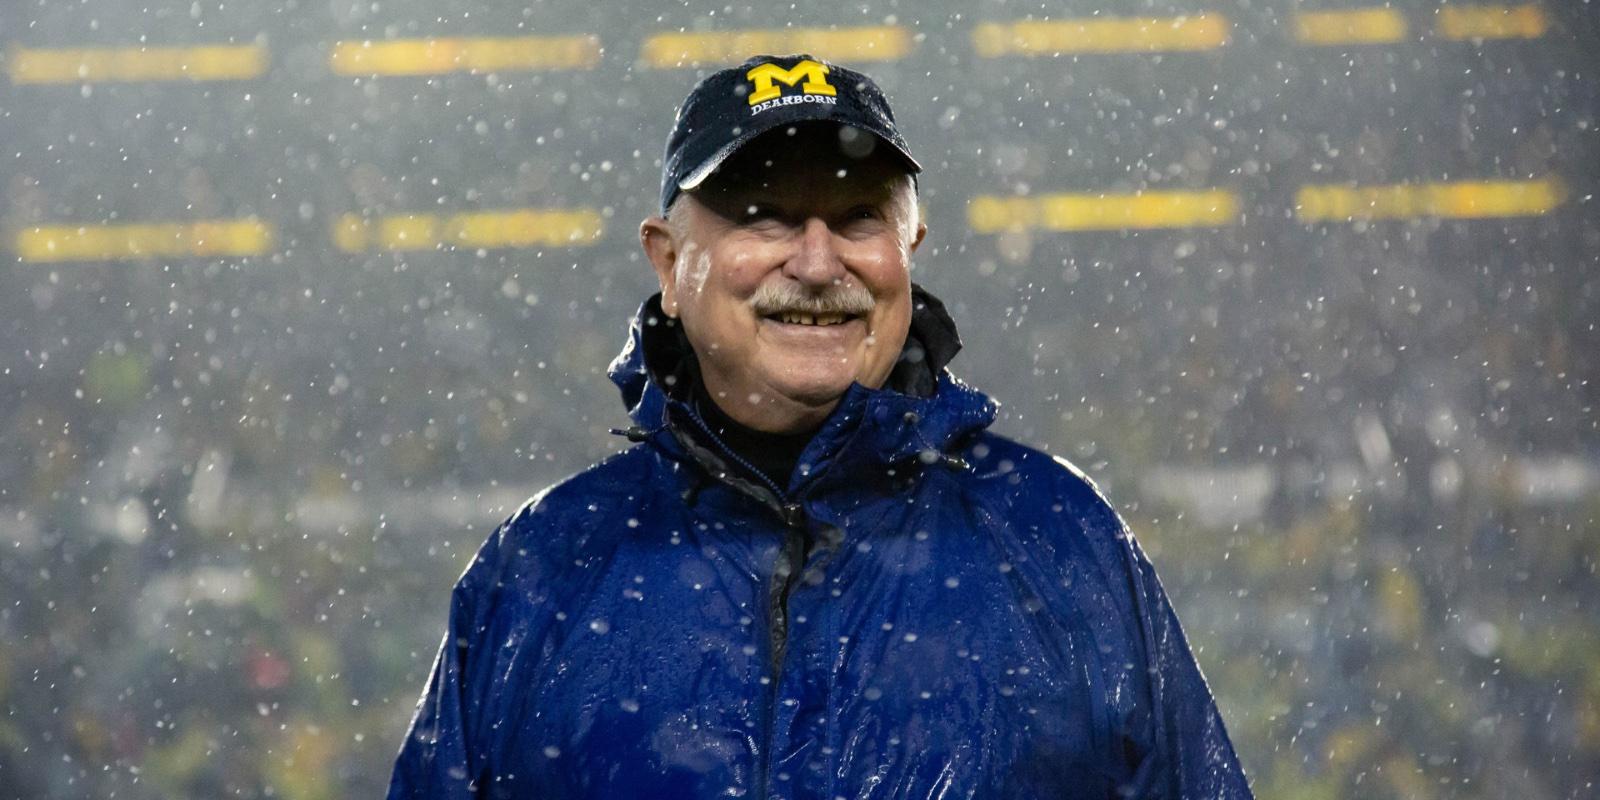 Tony England smiles while standing in the snow at Michigan Stadium